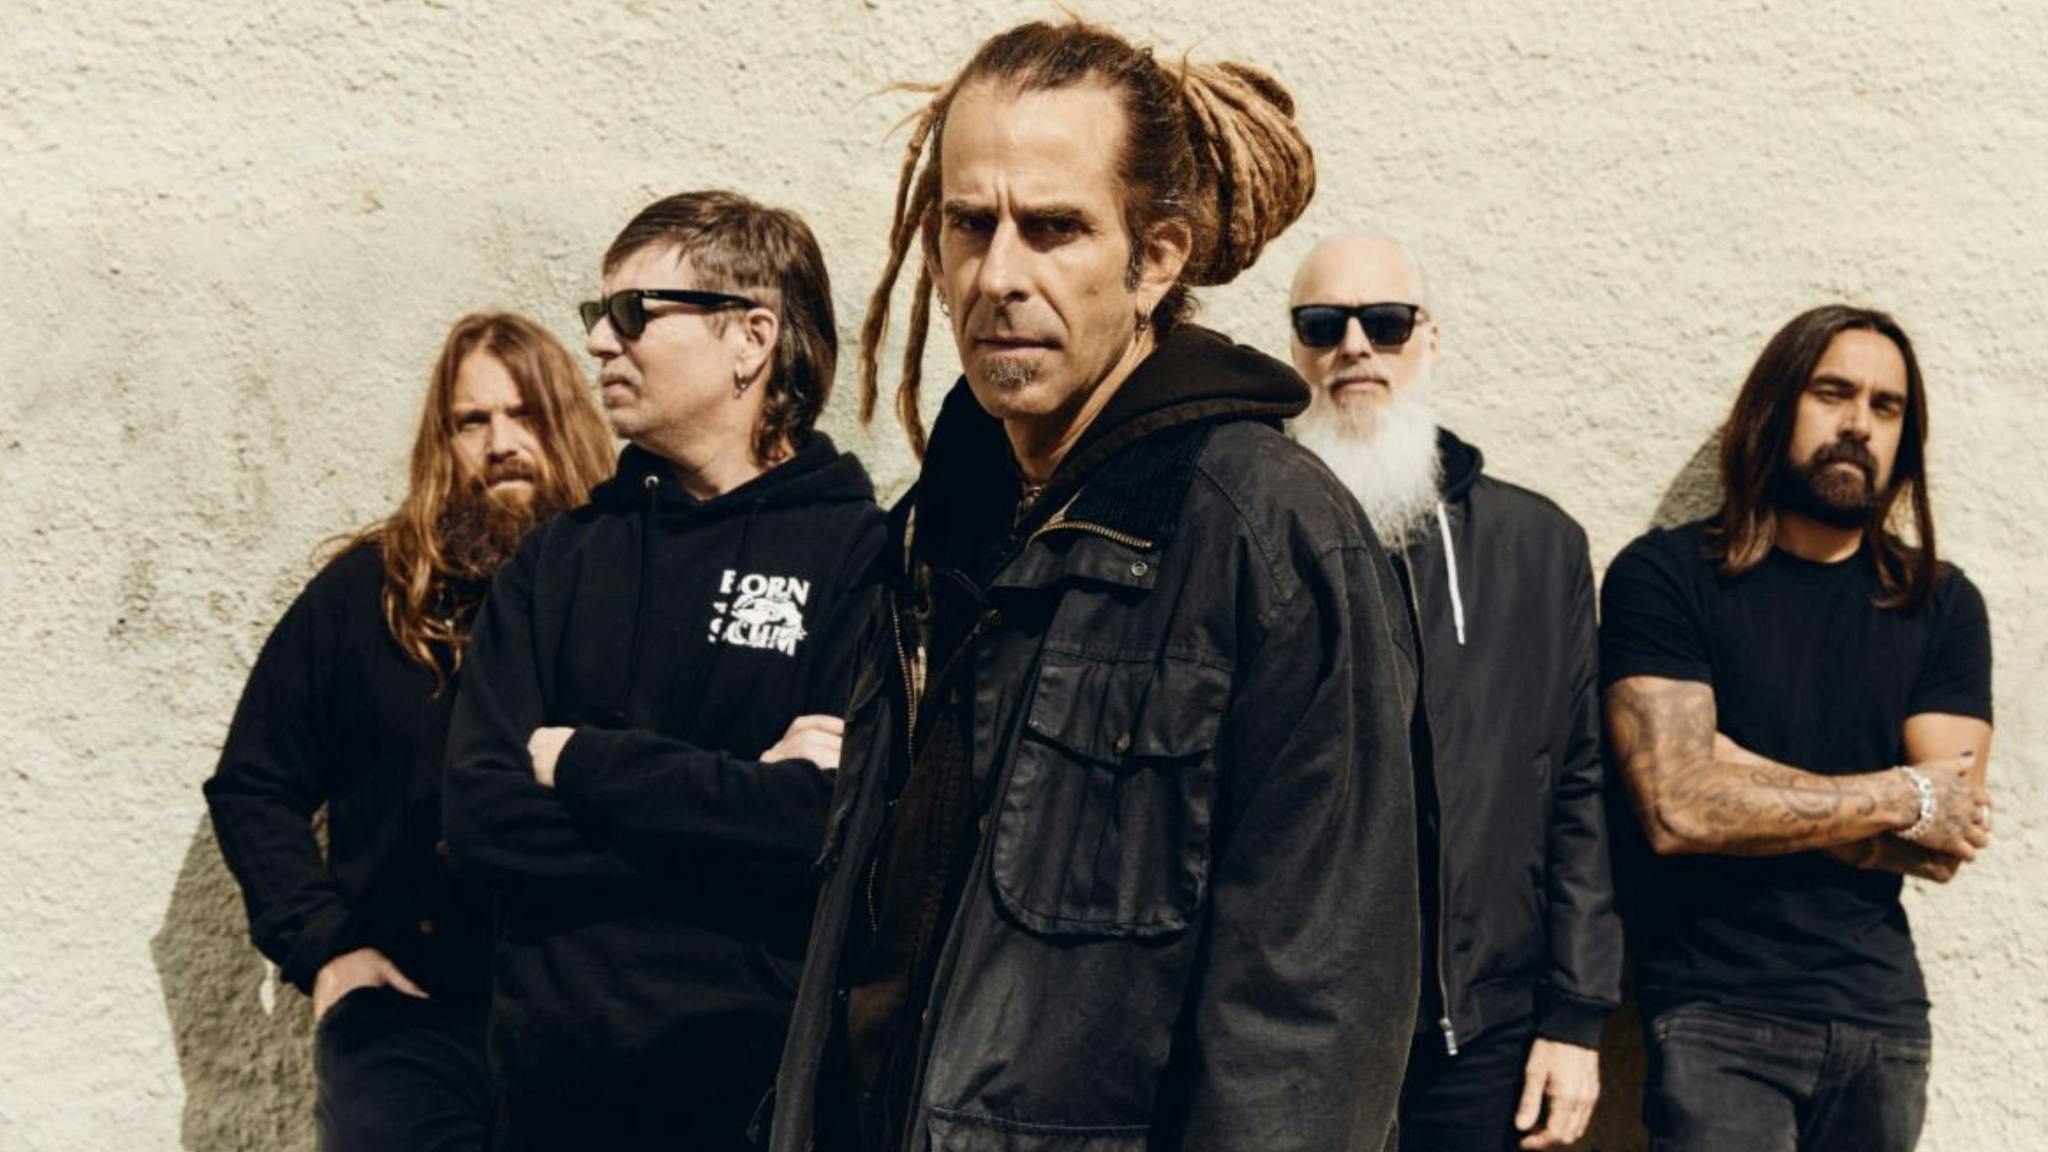 Lamb Of God have announced the first-ever Headbangers Boat cruise